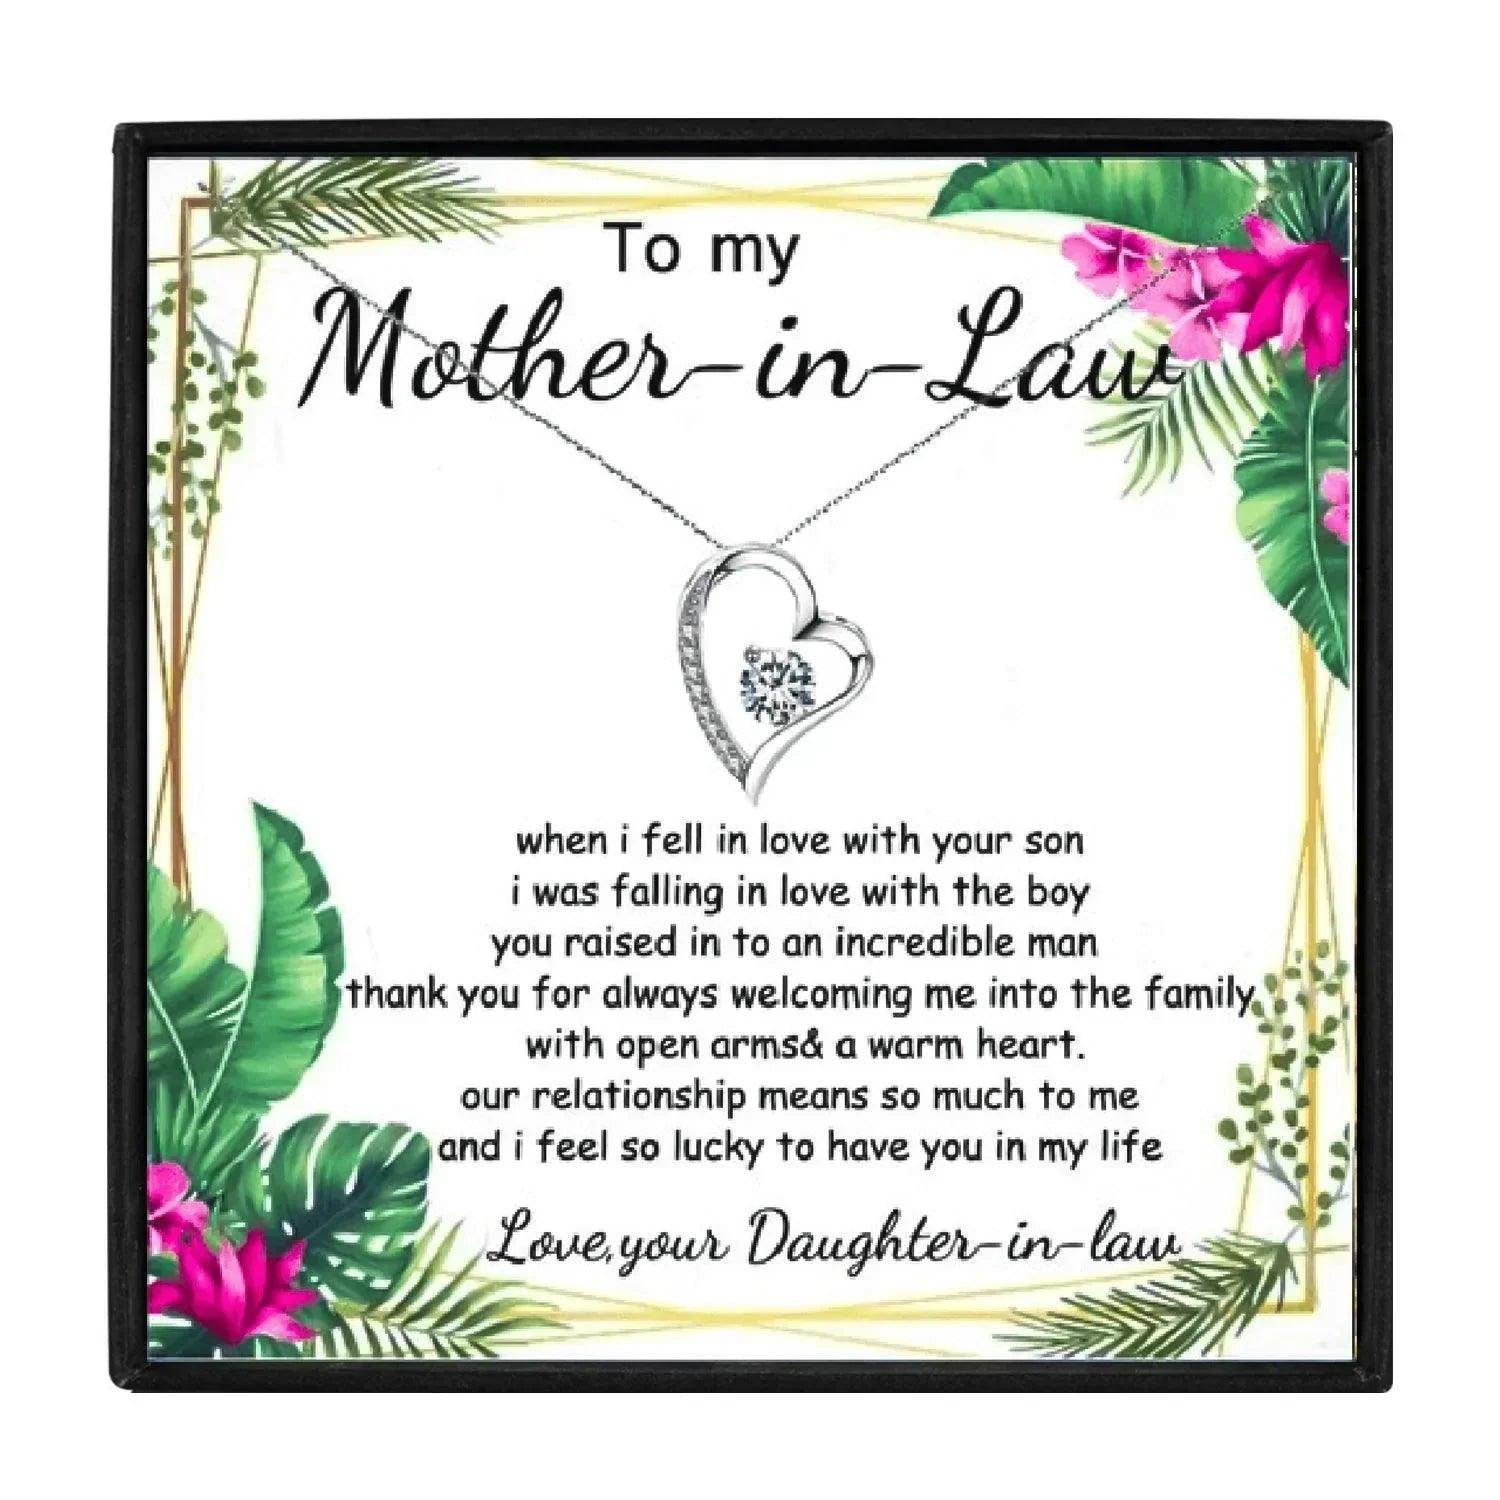 To My Mother in Law Necklace From Daughter in Law in 2023 | To My Mother in Law Necklace From Daughter in Law - undefined | Mother in law, mother in law Necklaces, Mother in law Women Necklace, To My Mother in law Necklace, To My Mother in Law Necklace From Daughter in Law, To My Mother in Law Necklace From Son in Law | From Hunny Life | hunnylife.com